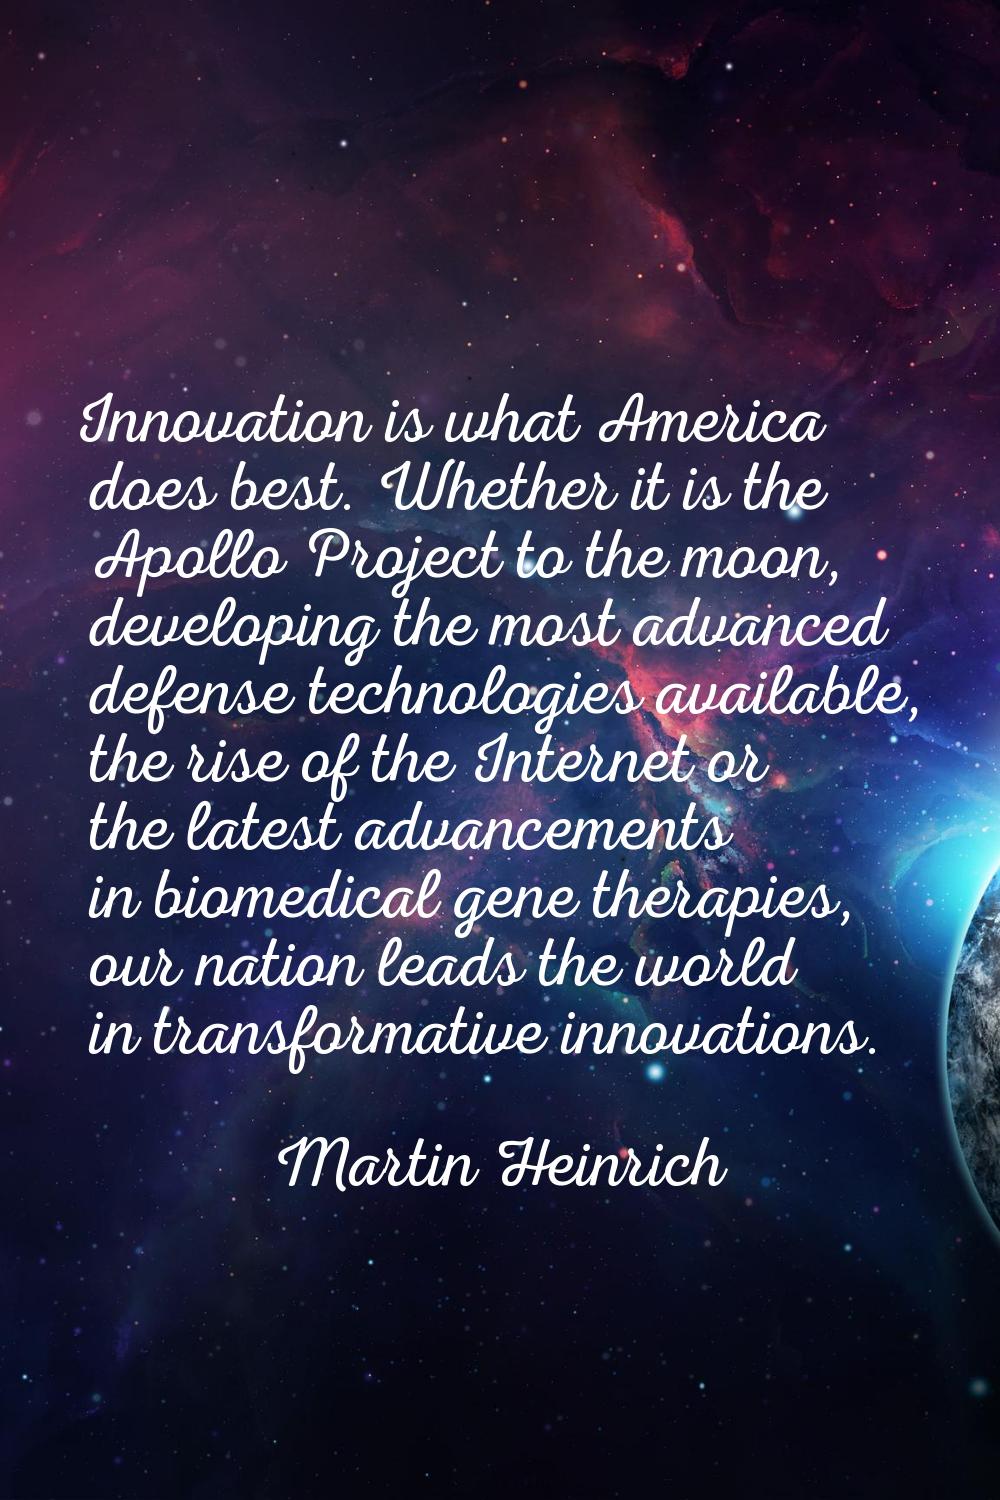 Innovation is what America does best. Whether it is the Apollo Project to the moon, developing the 